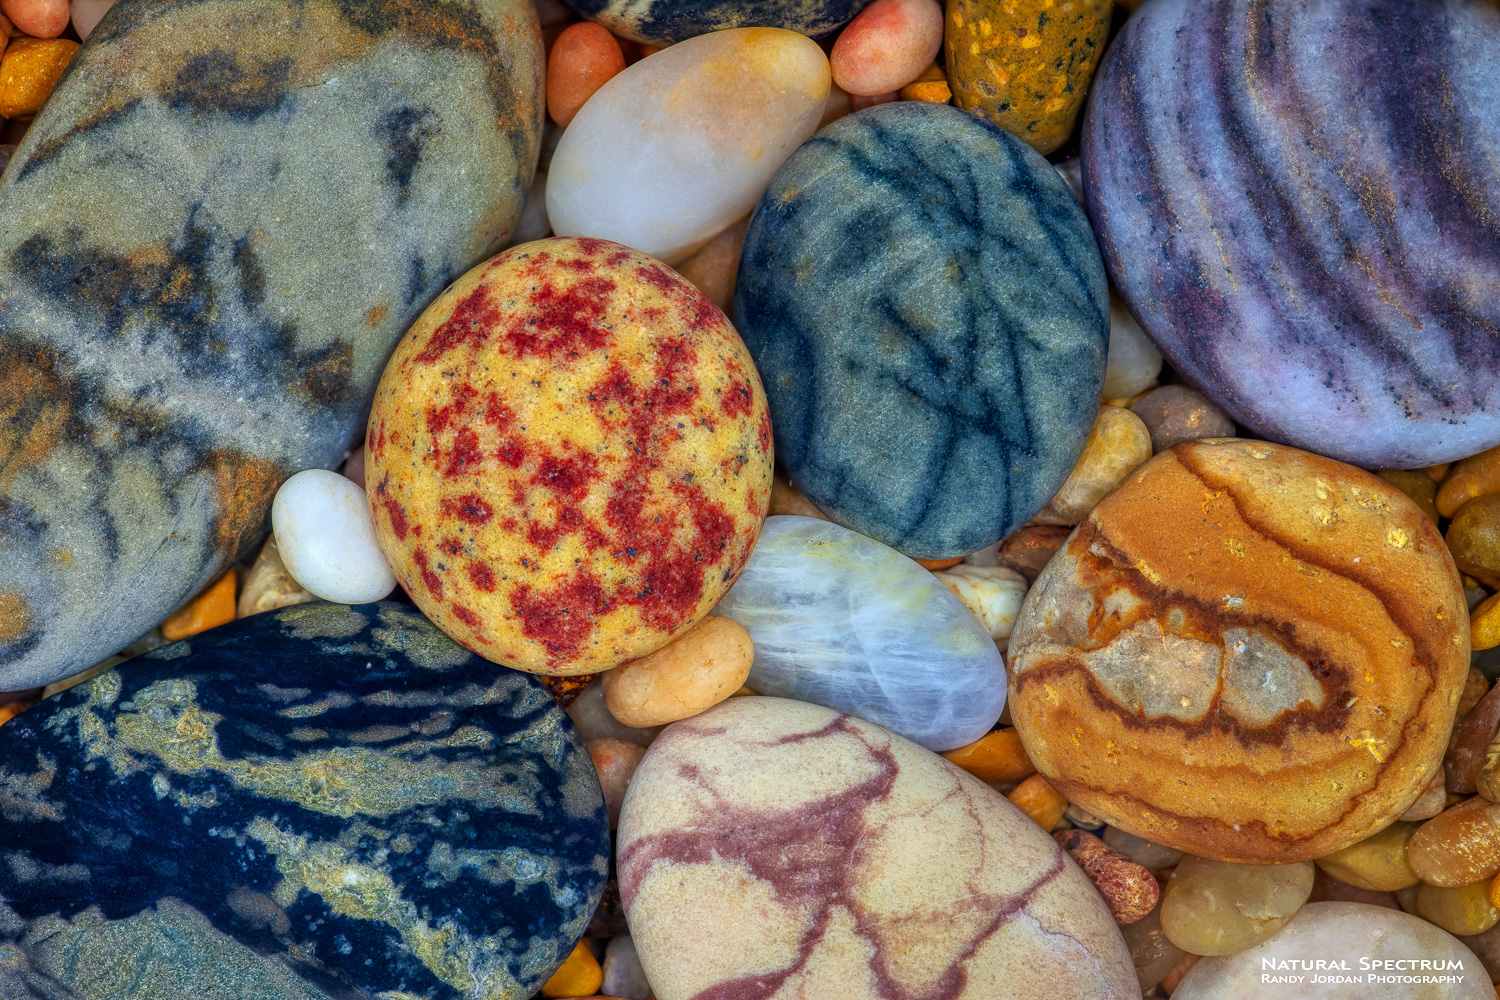 The power of the ocean and time create a galaxy of colors and shapes for beach rocks.